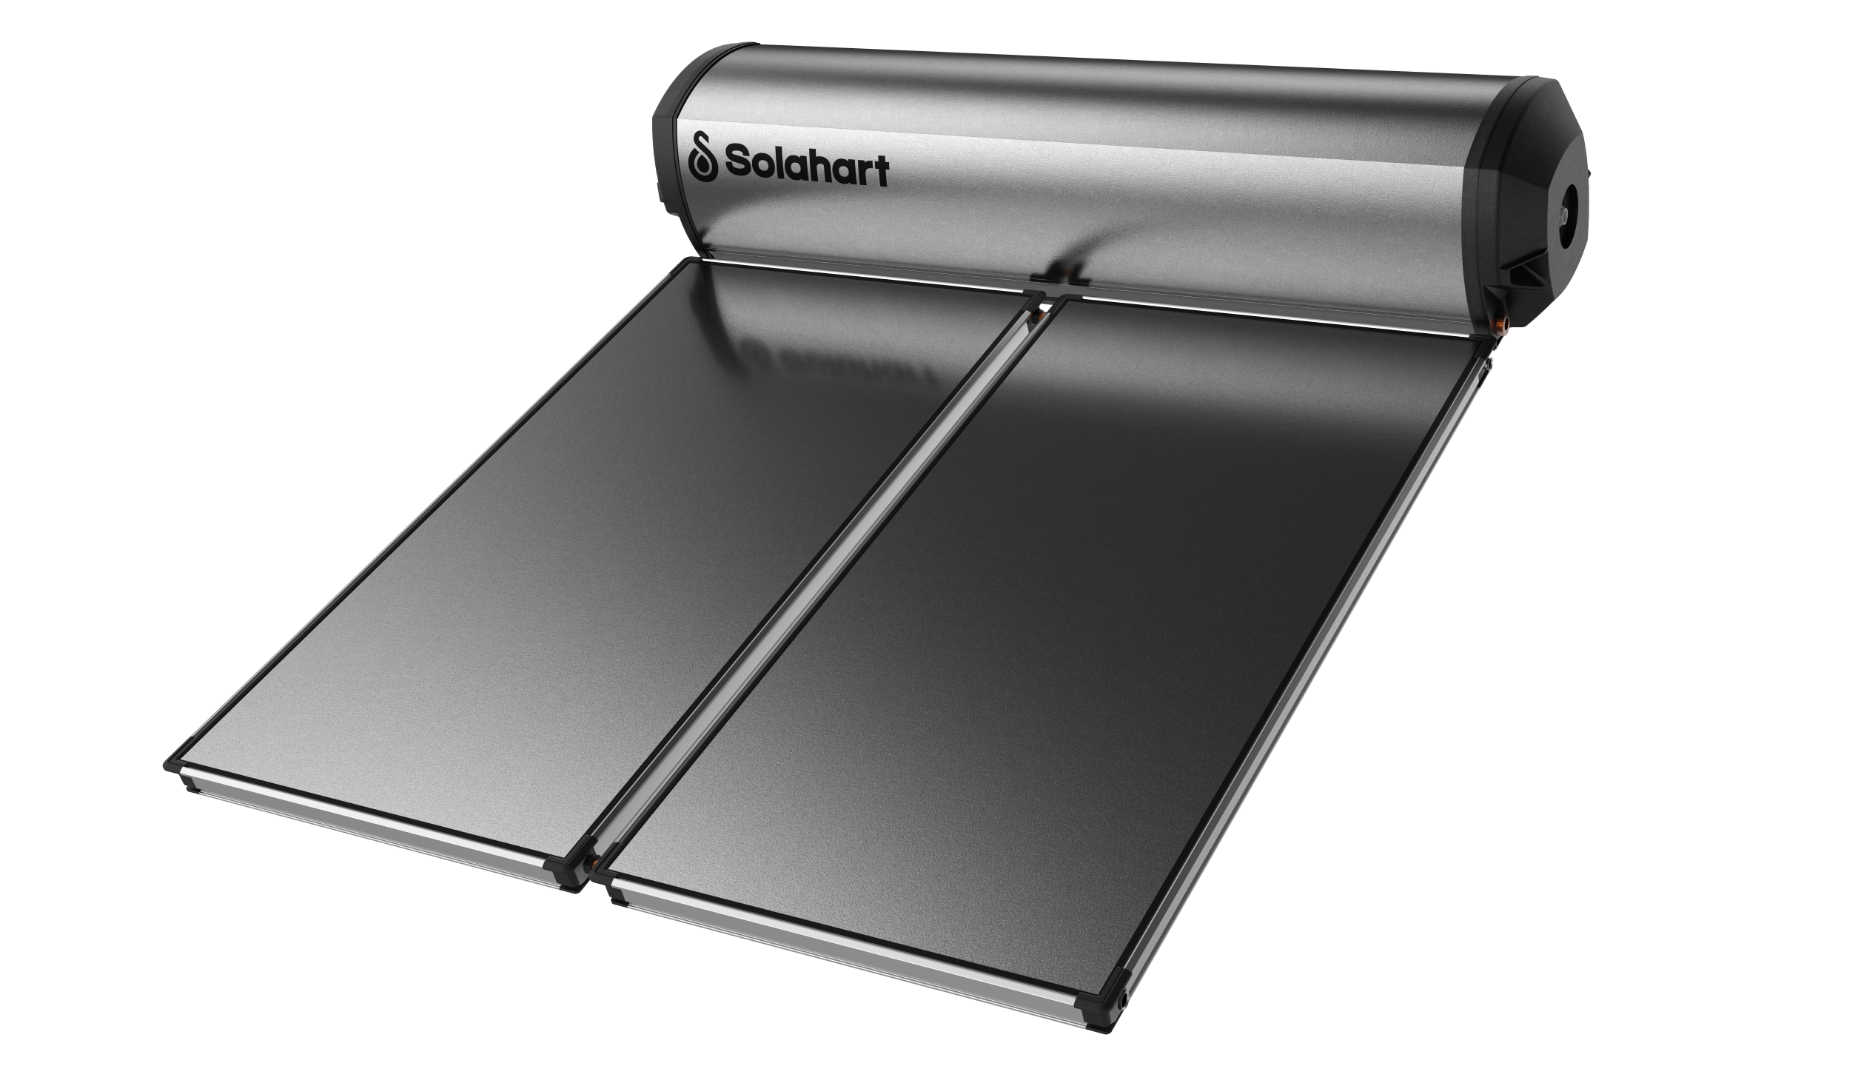 Solahart SP series solar hot water heater available from Orange Electrical Works